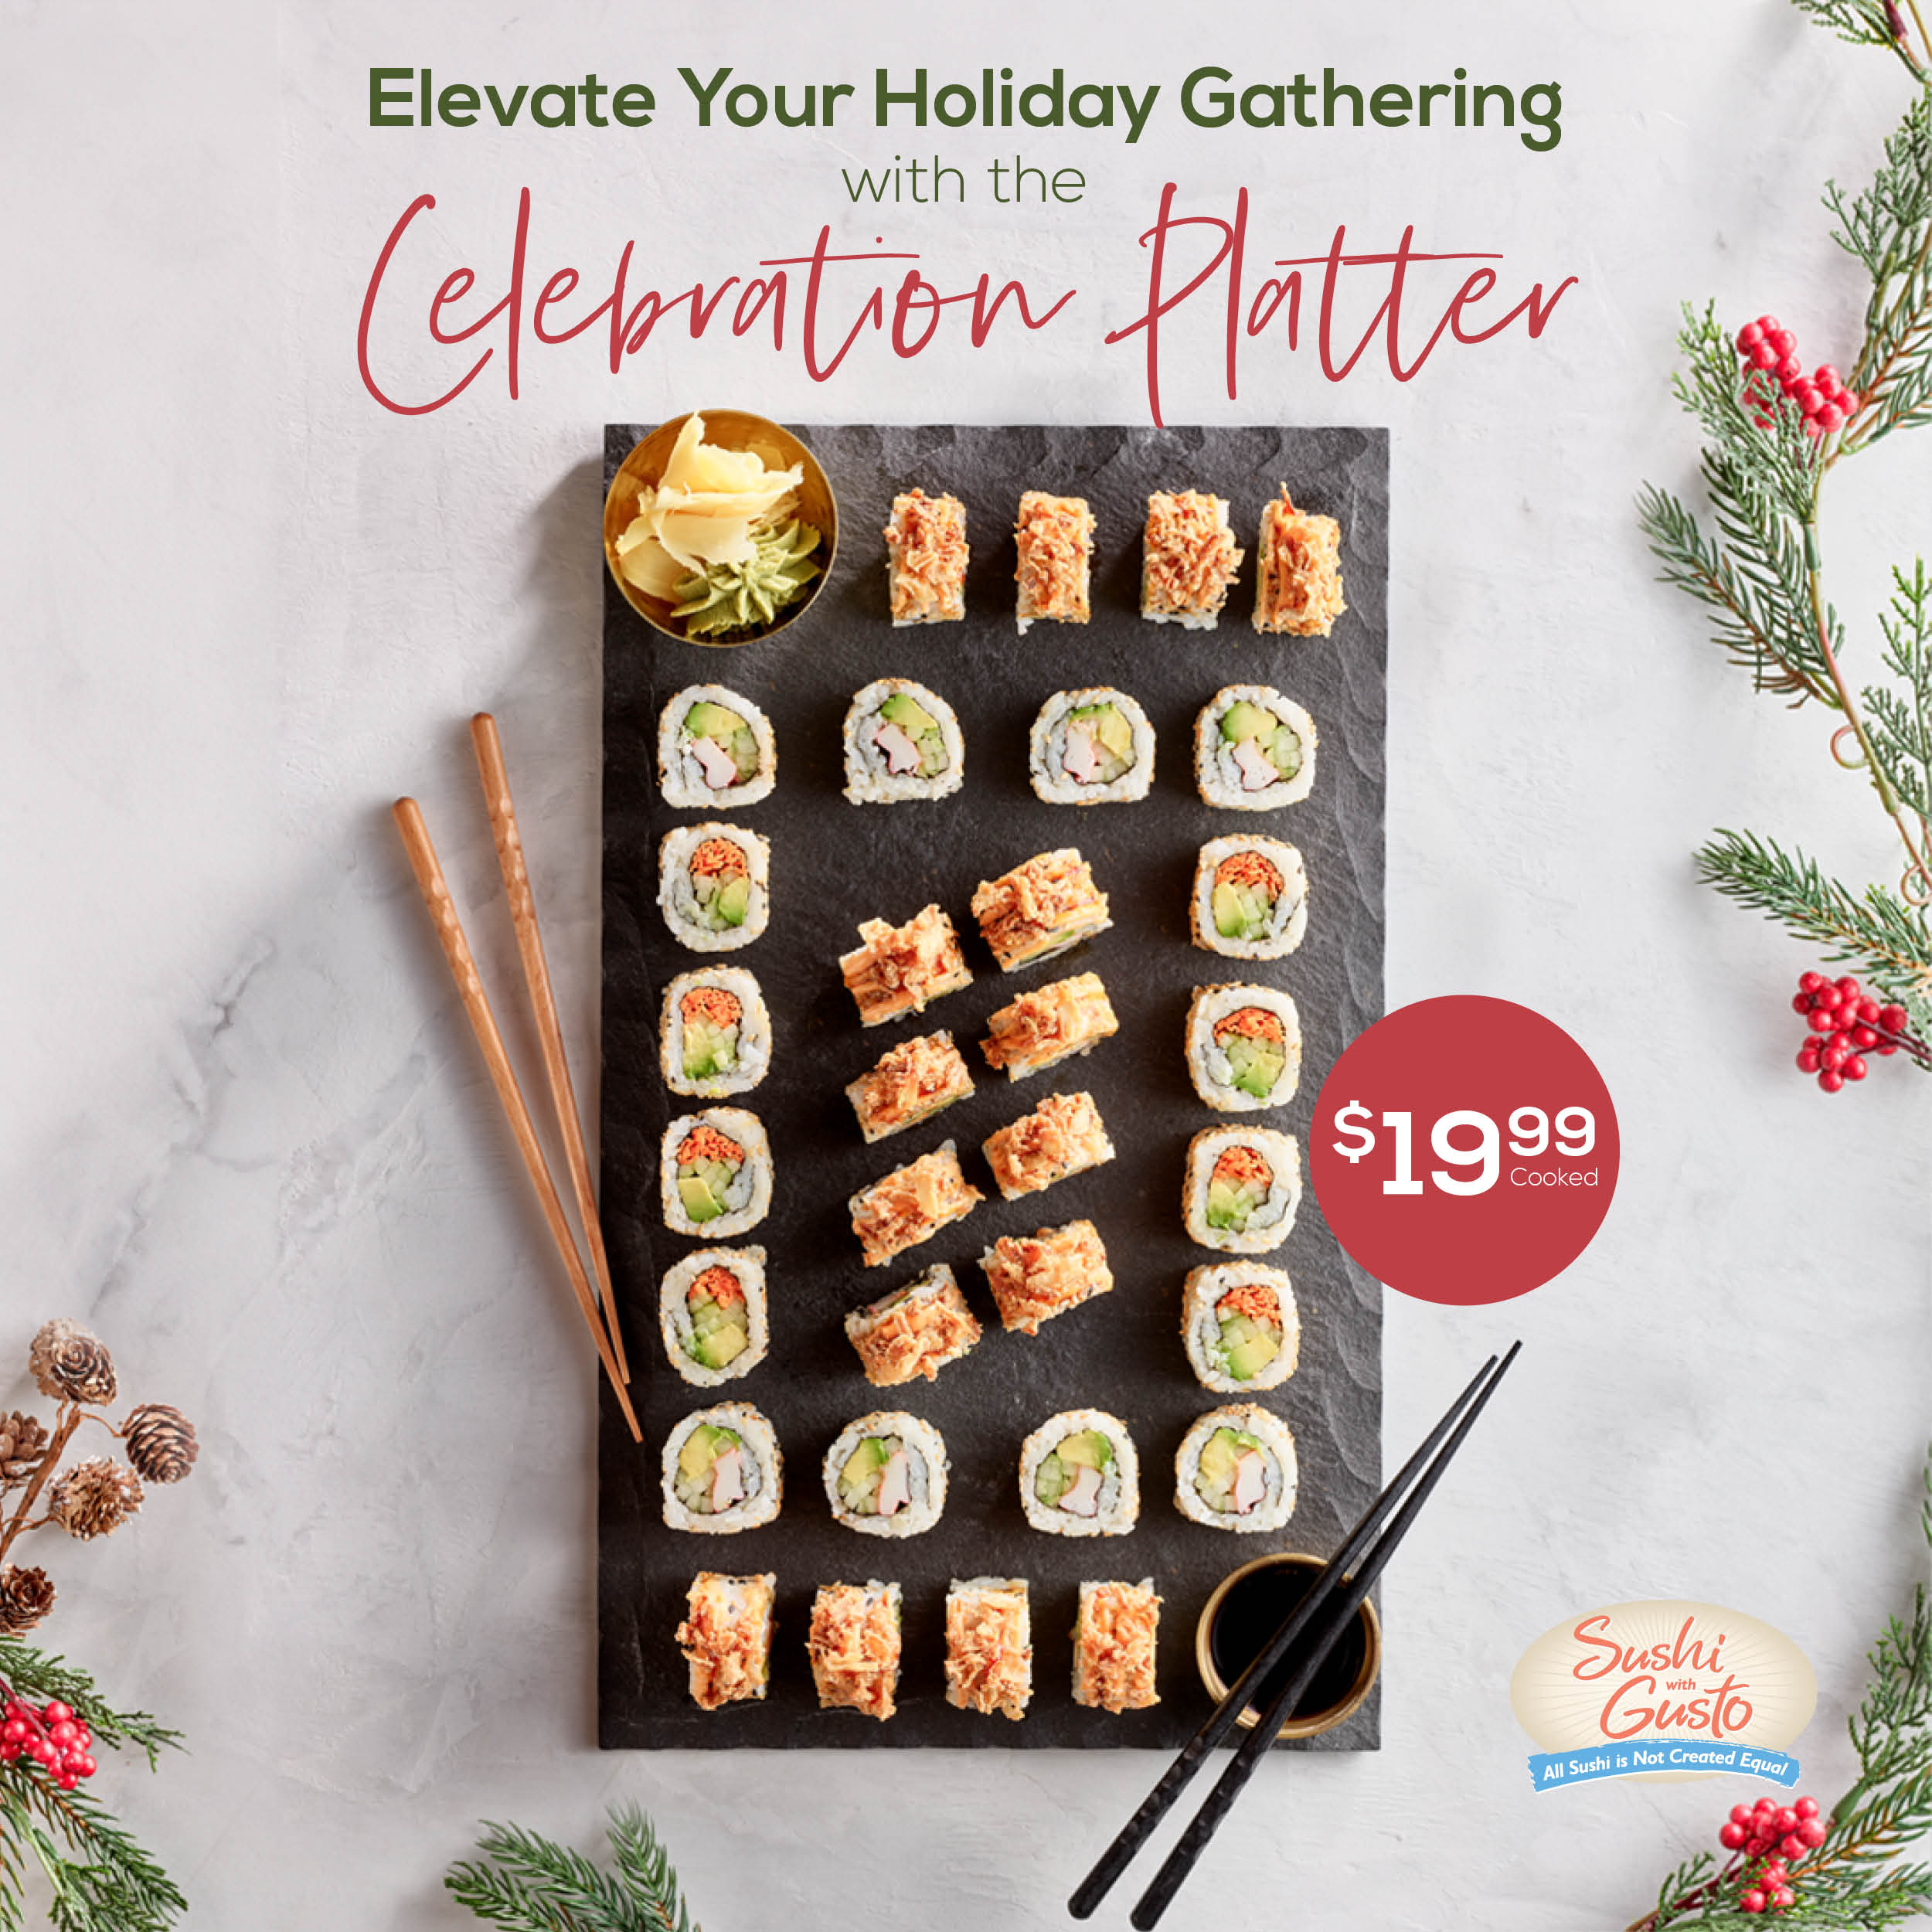 Available through 1/1/24 Sushi With Gusto!